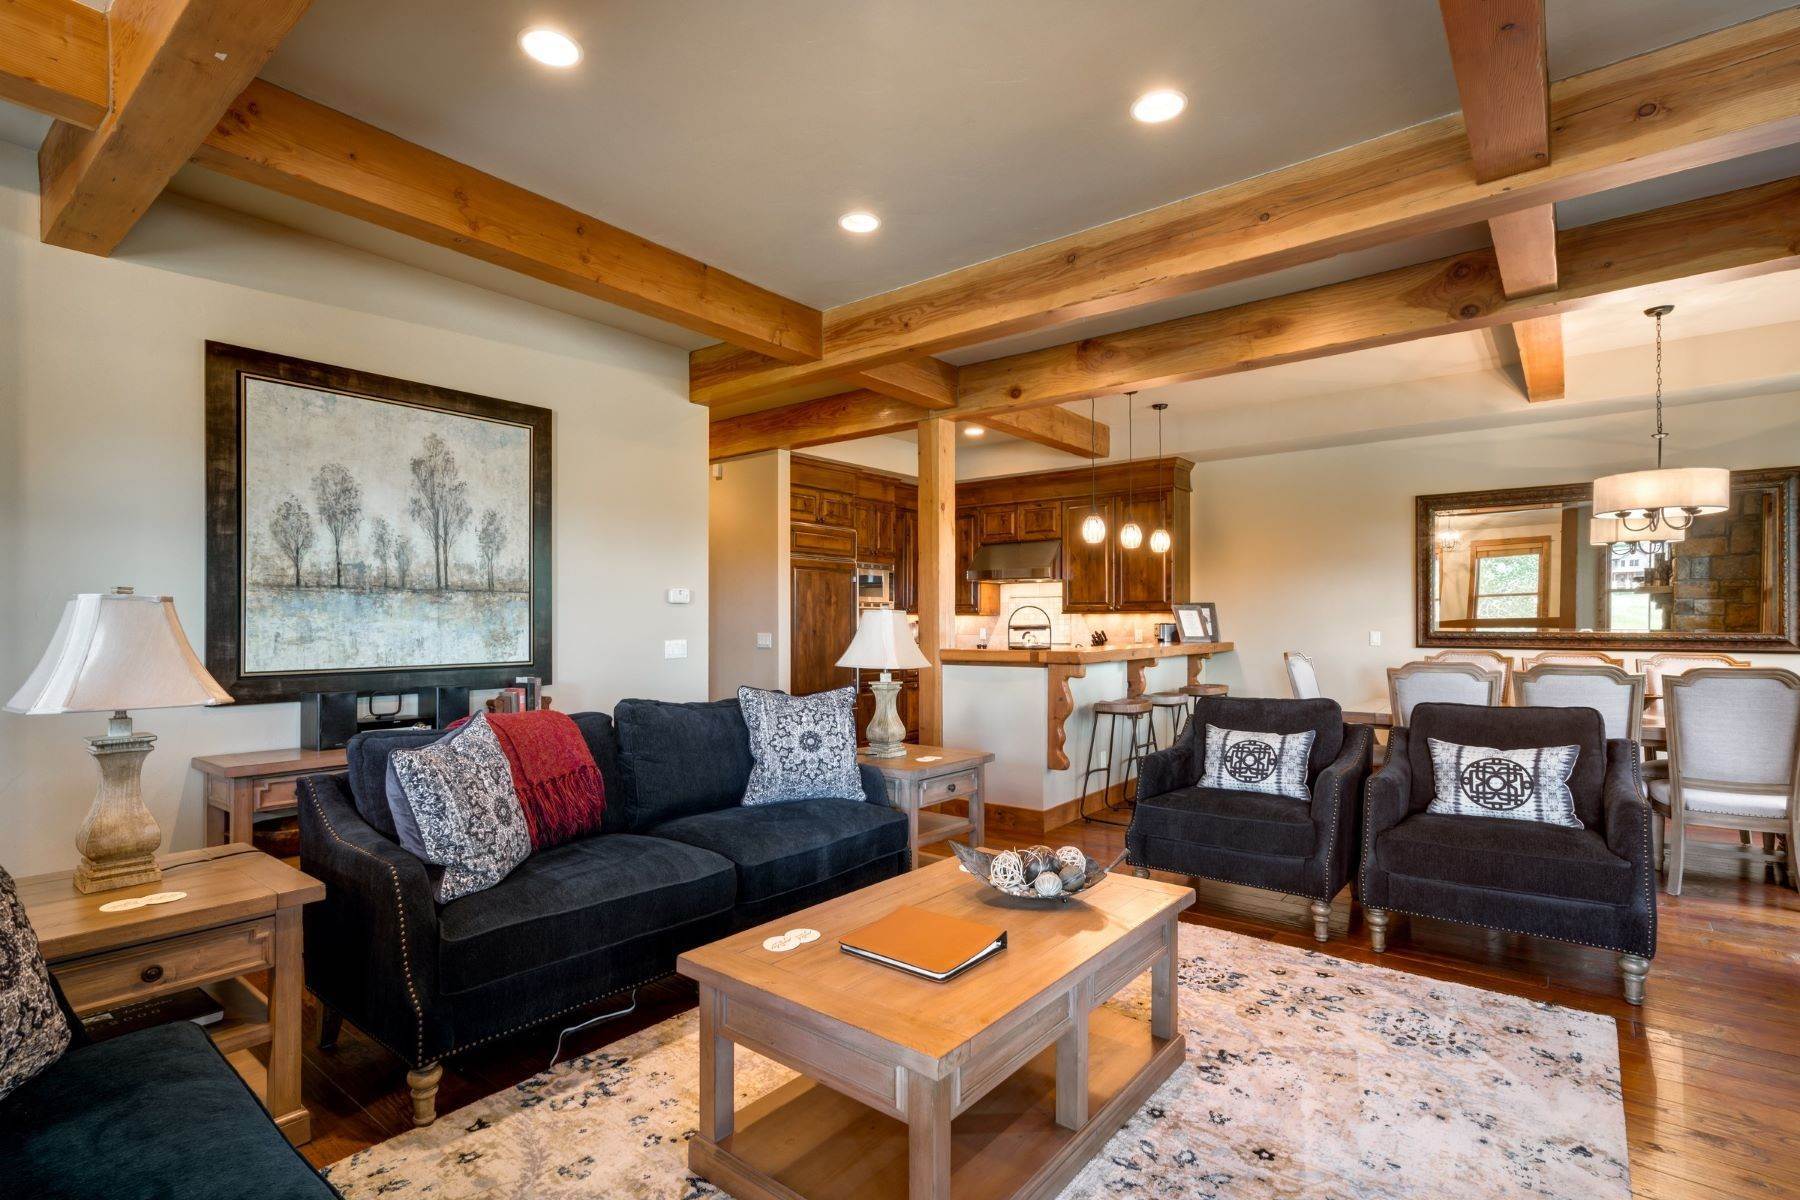 7. Fractional Ownership Property for Sale at 1331 Turning Leaf Court, Steamboat Springs, CO, 80487 1331 Turning Leaf Court Steamboat Springs, Colorado 80487 United States